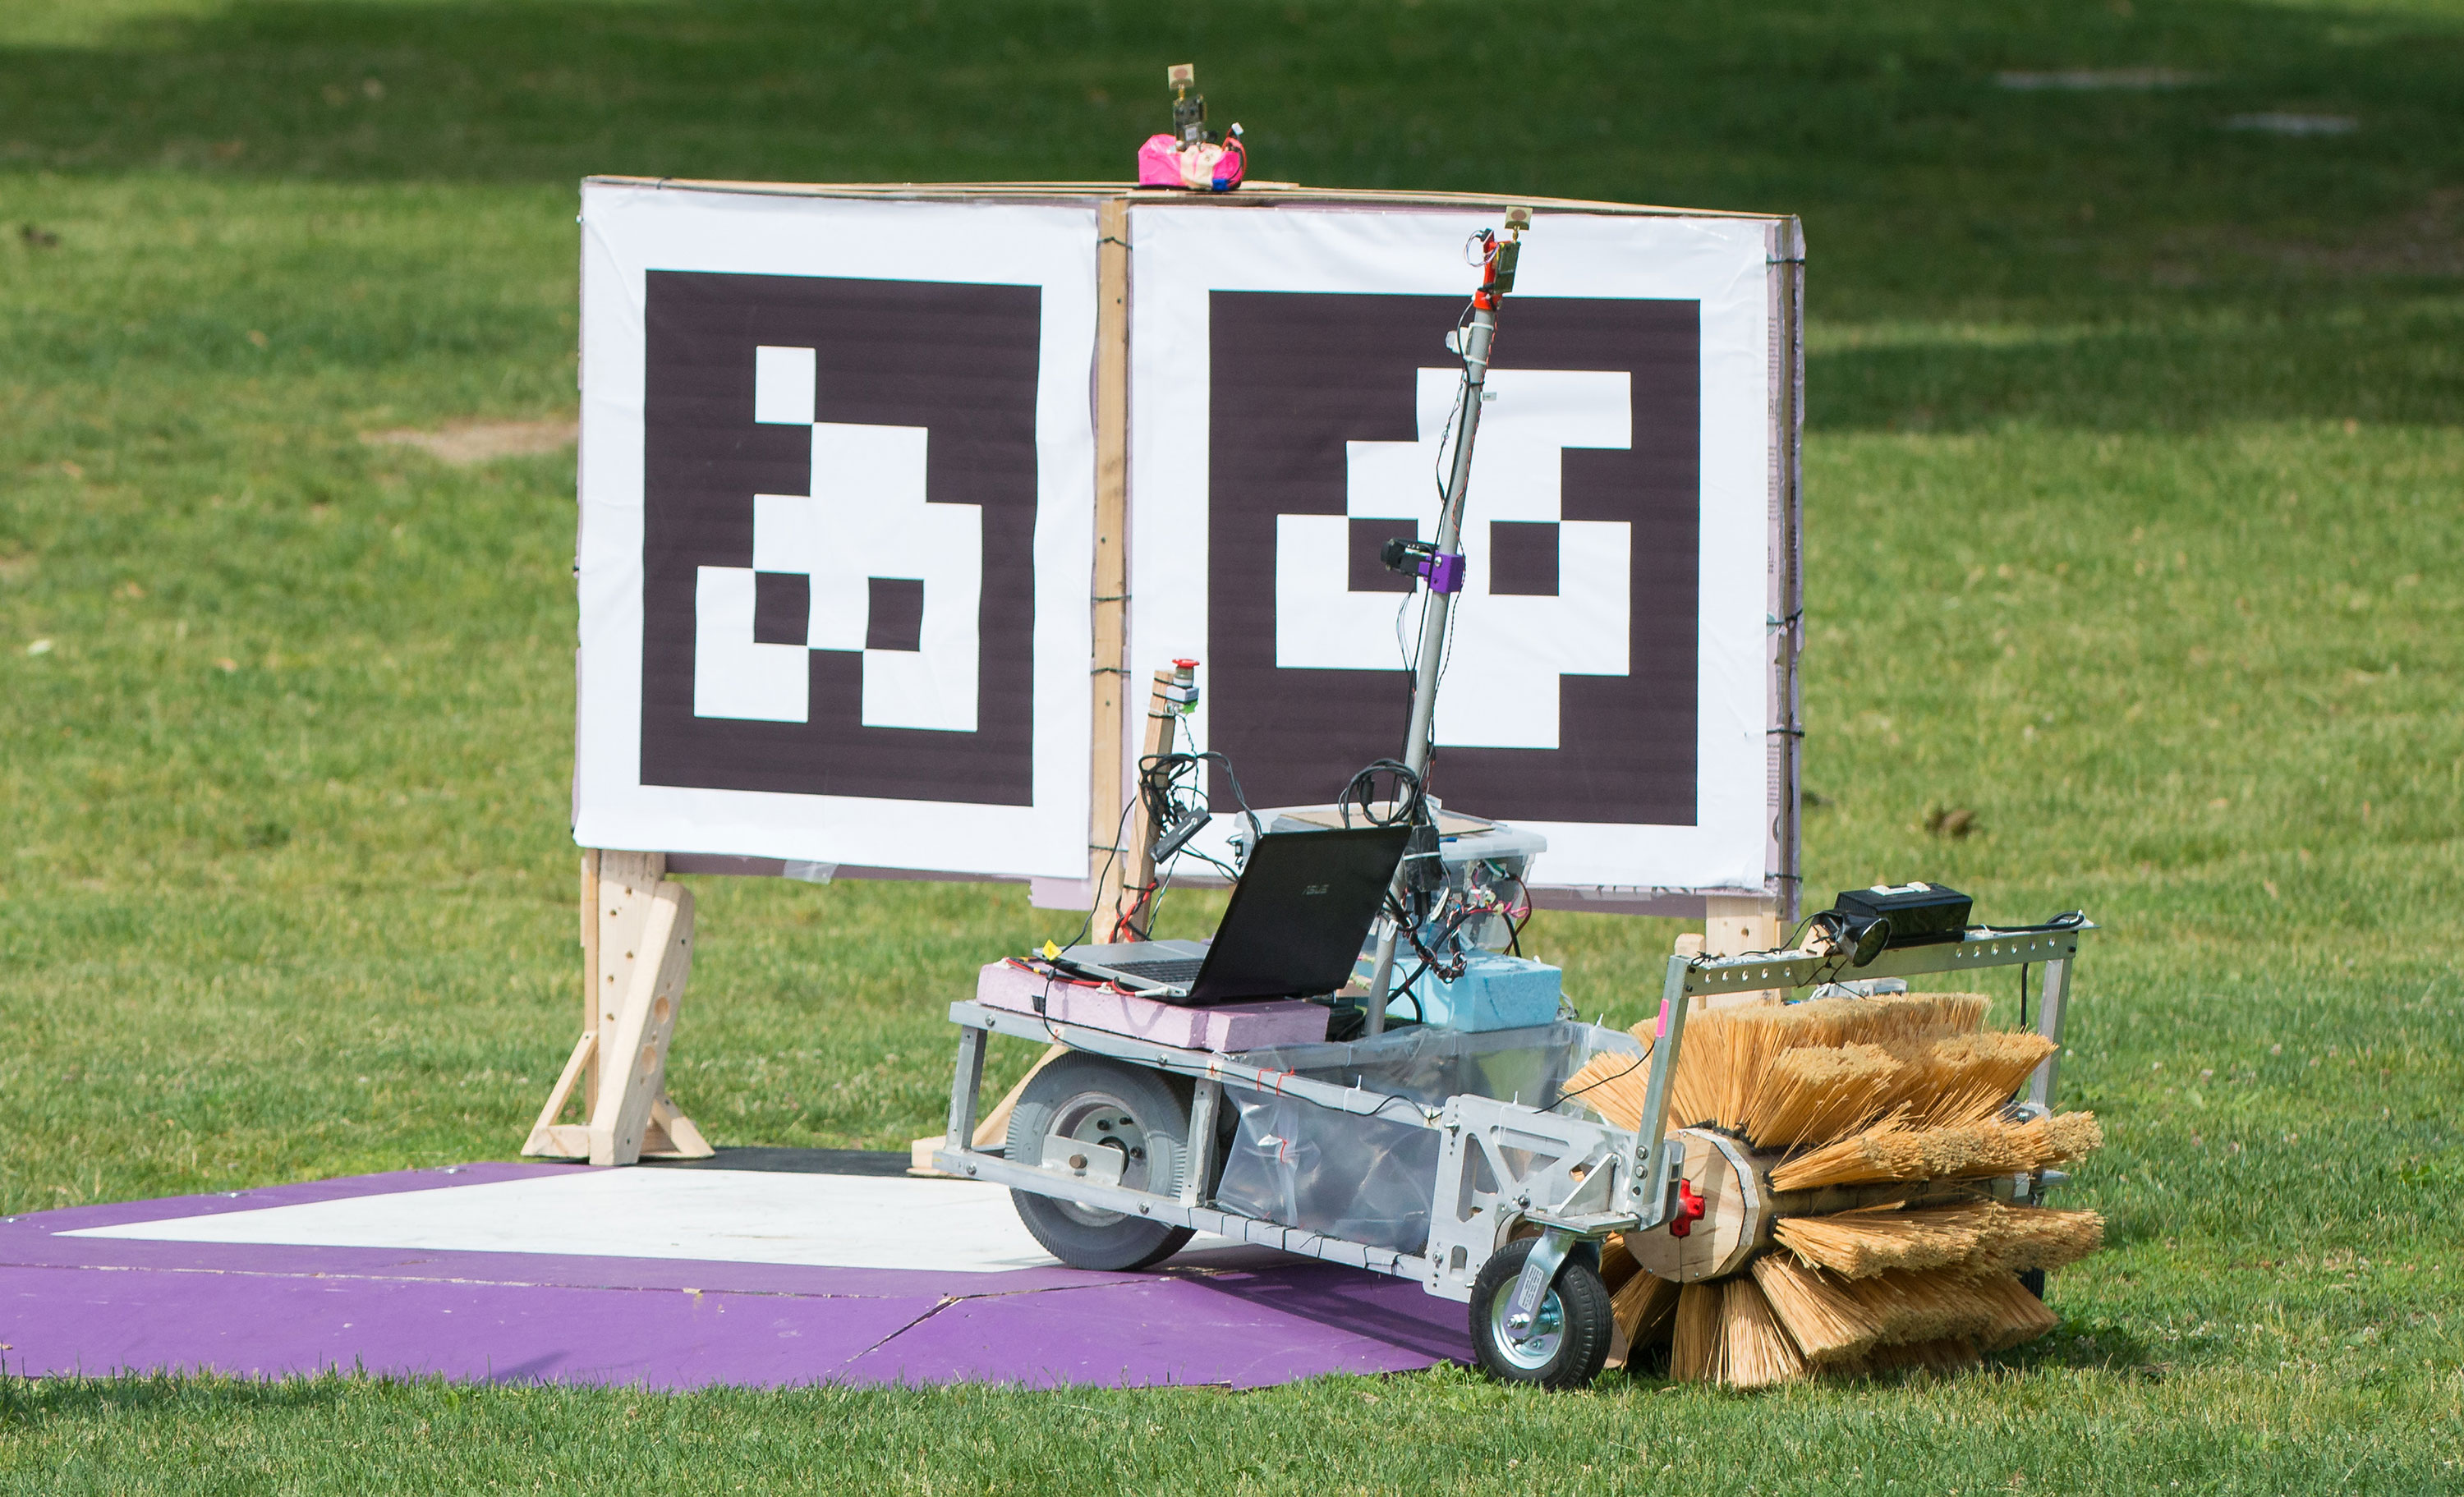 The Mind and Iron team robot is seen as it drives off the starting platform during a rerun of the level one challenge at the 2015 Sample Return Robot Challenge. Credit: NASA/Joel Kowsky